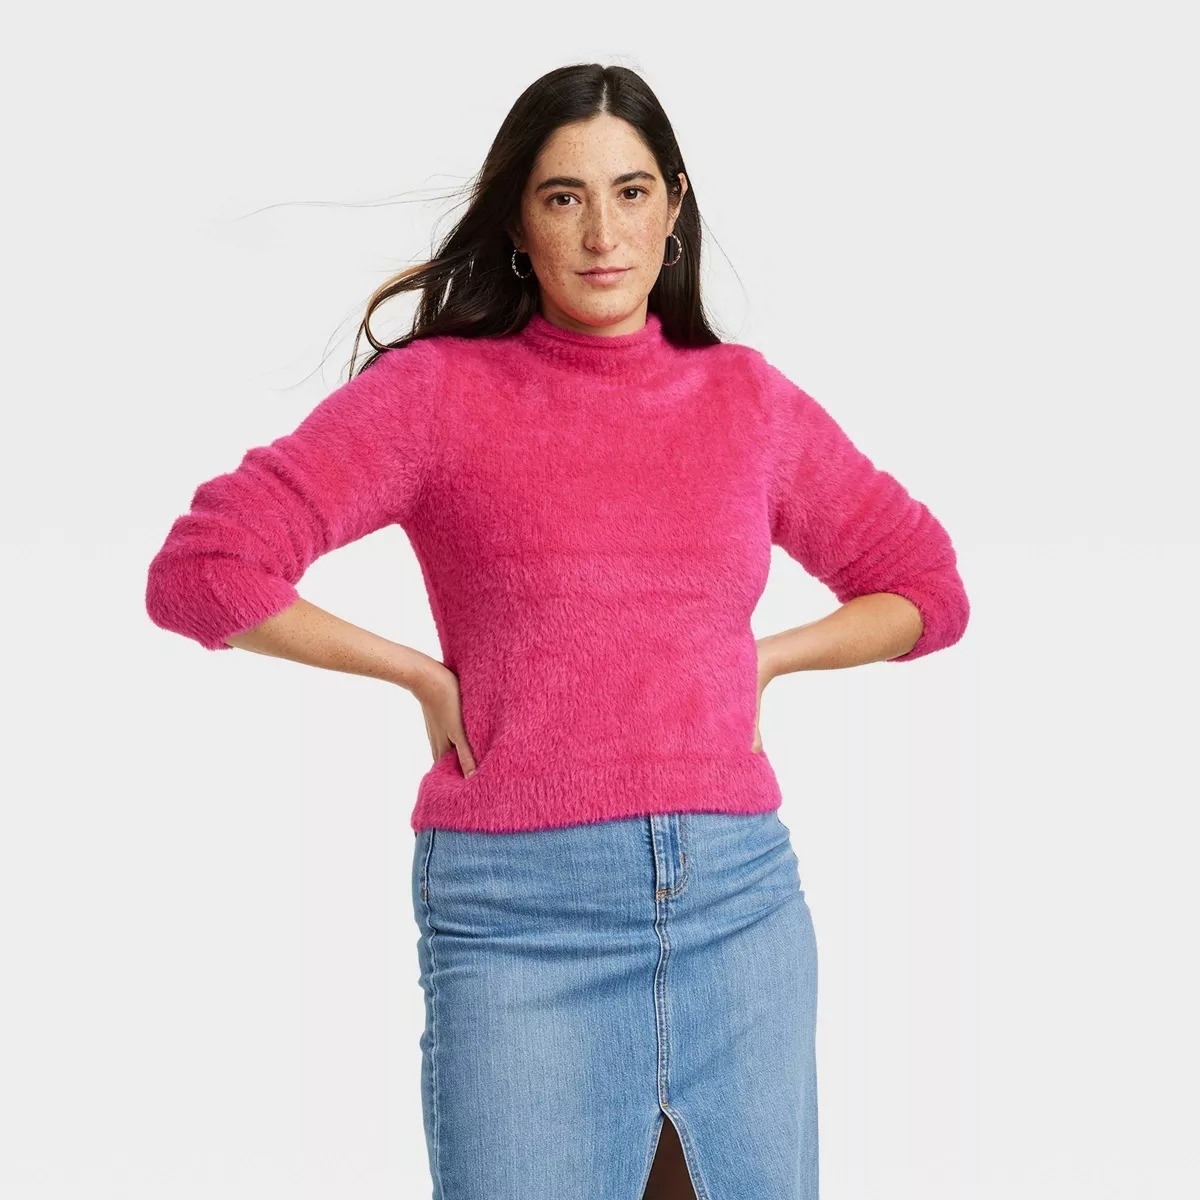 pink fuzzy sweater on model